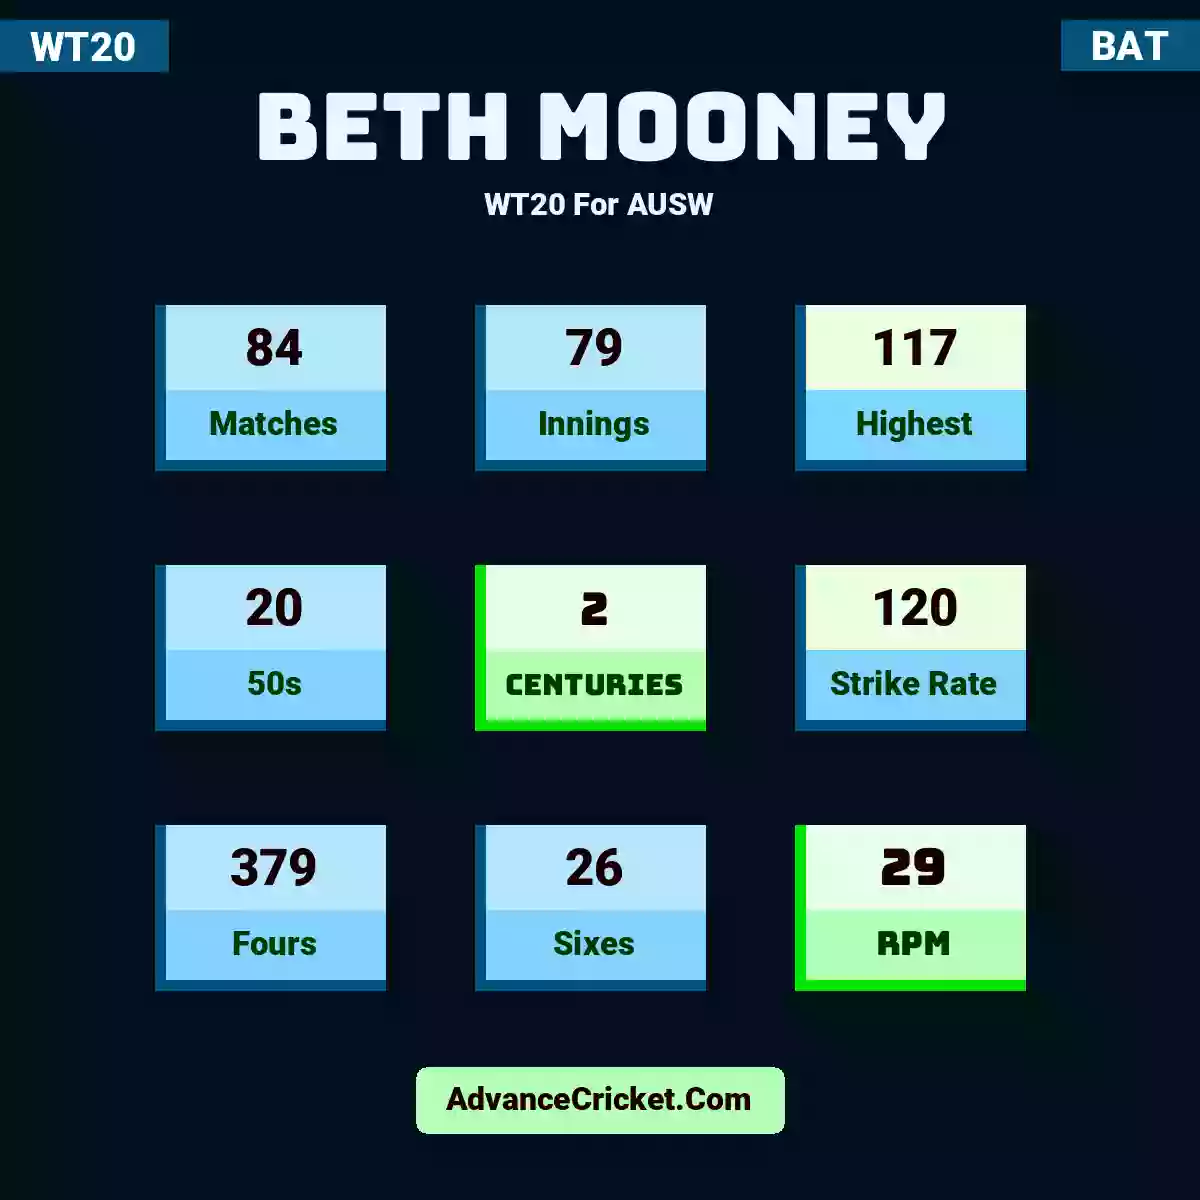 Beth Mooney WT20  For AUSW, Beth Mooney played 84 matches, scored 117 runs as highest, 20 half-centuries, and 2 centuries, with a strike rate of 120. B.Mooney hit 379 fours and 26 sixes, with an RPM of 29.